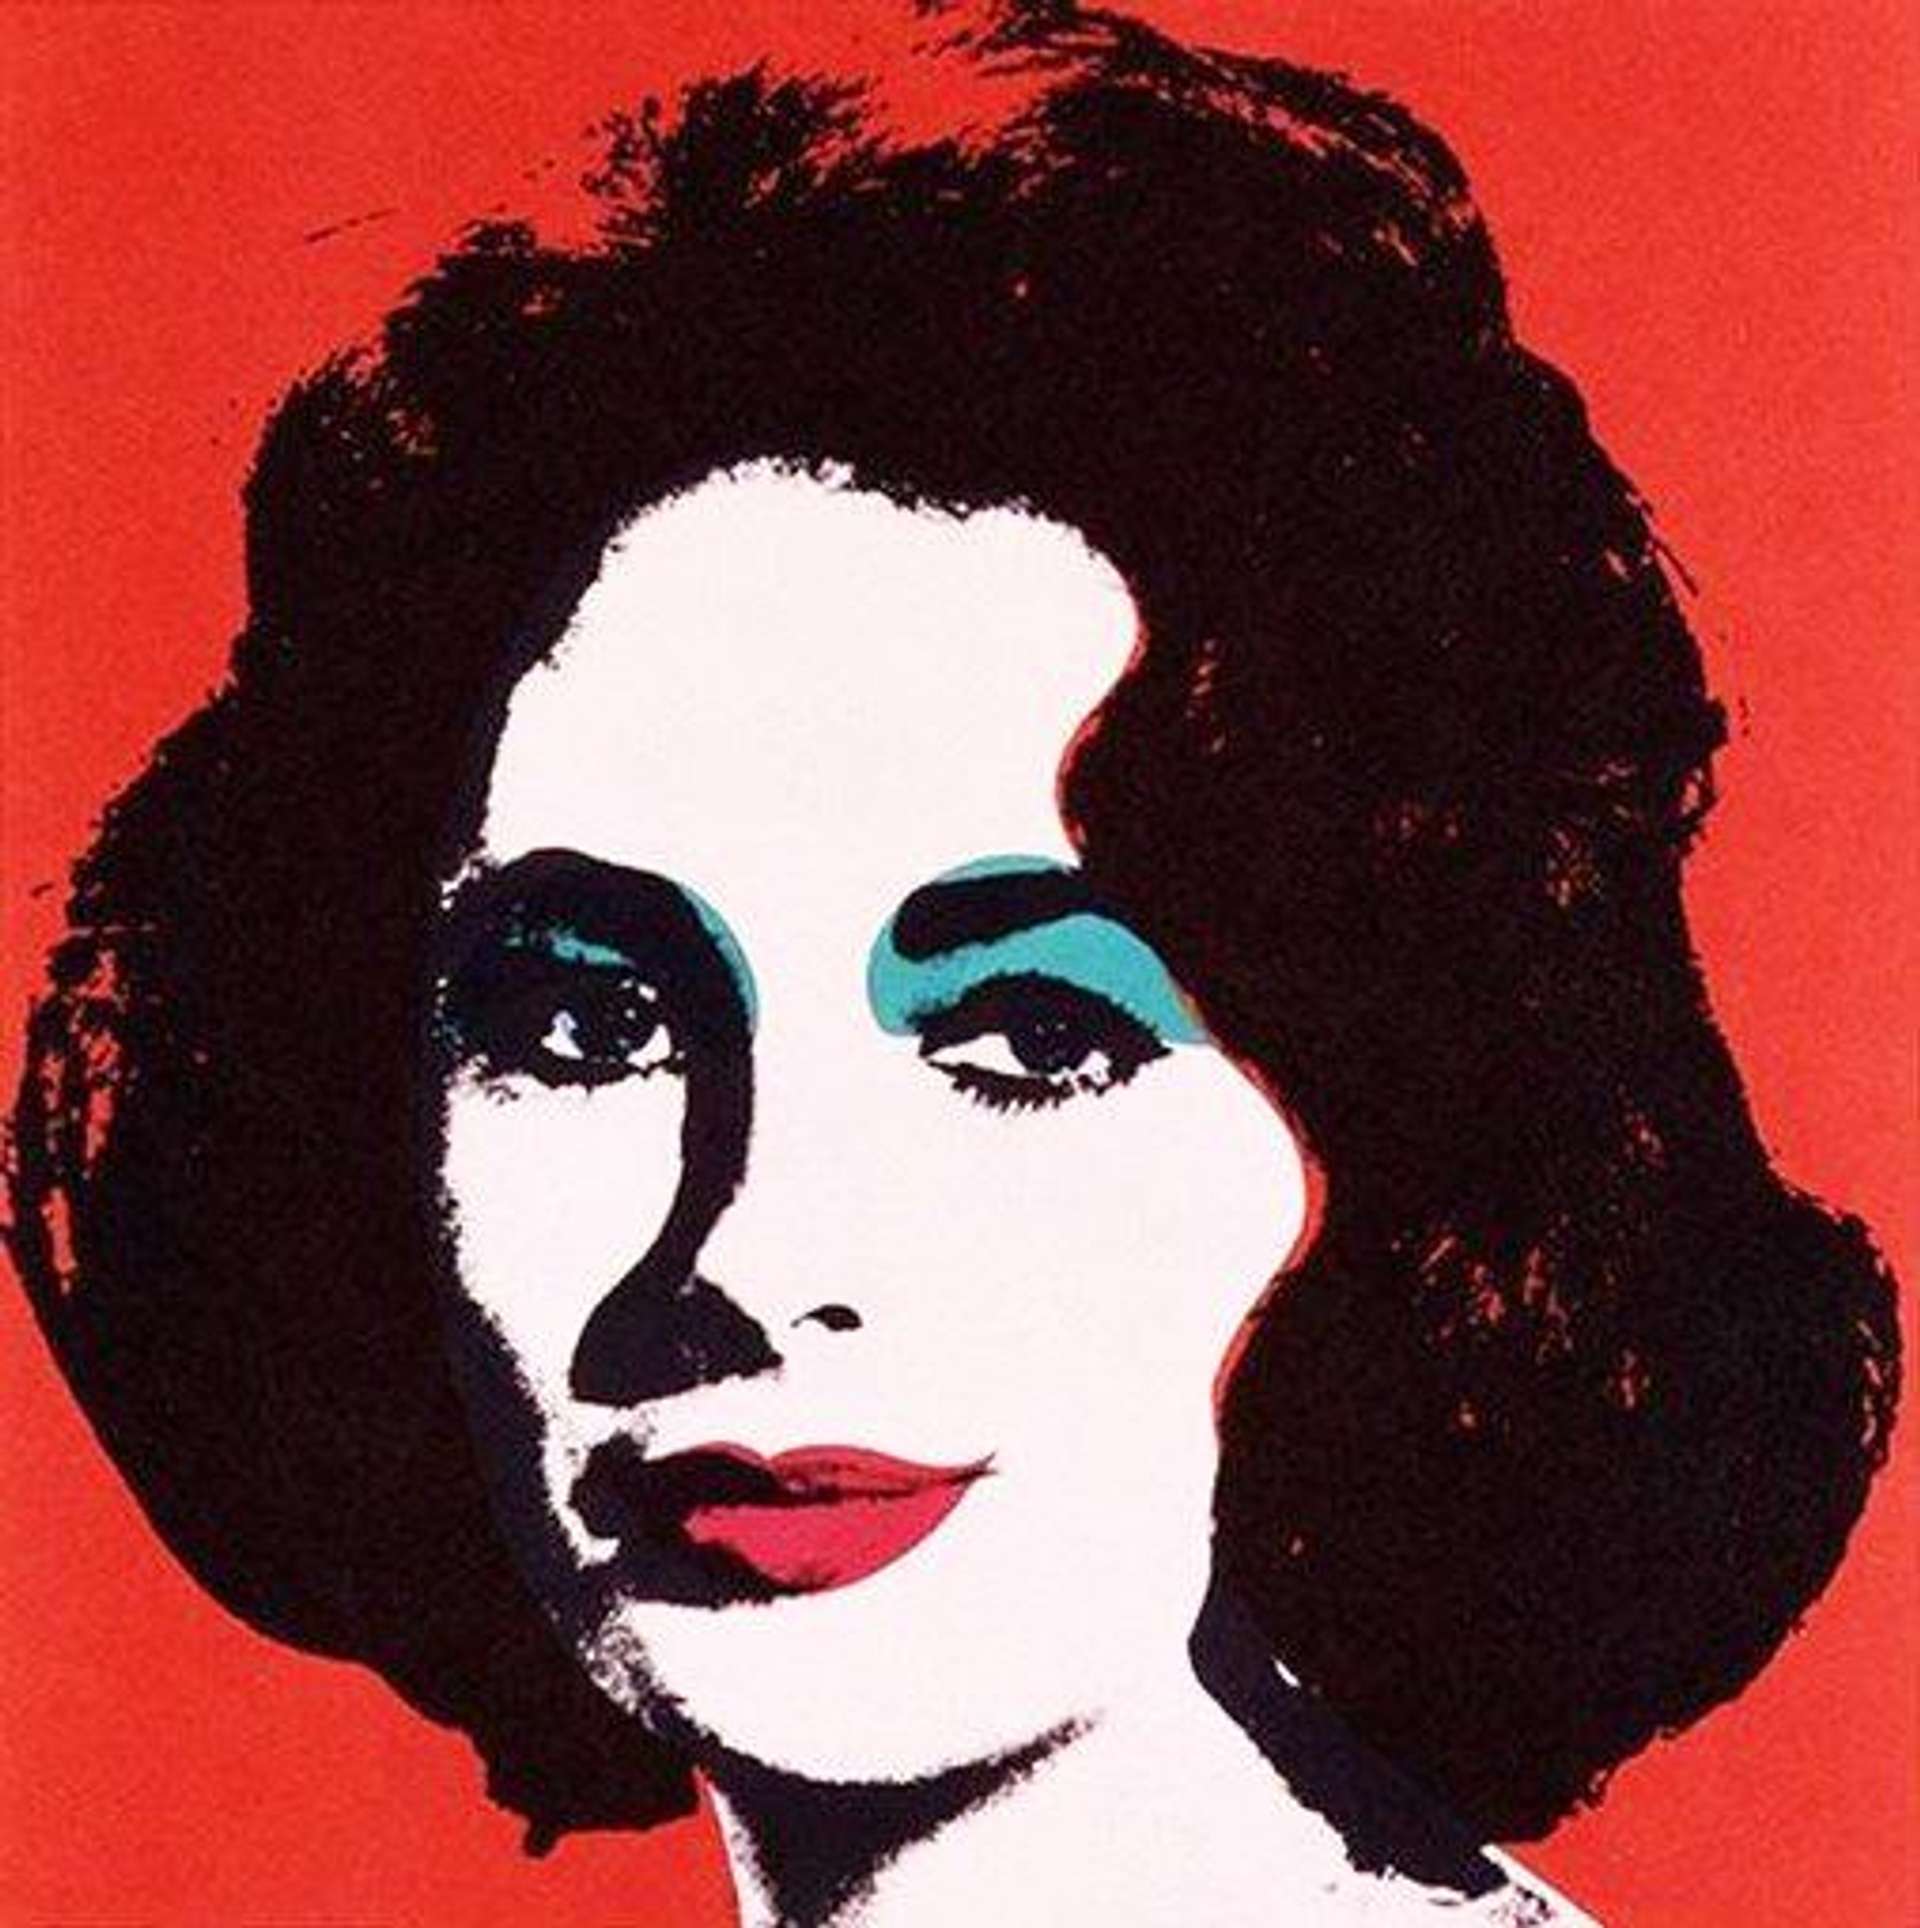 A screenprint by Andy Warhol depicting the close-up portrait of Liz, Taylor against a bright reg background, with Taylor's lips coloured in the same shade of red and her eyelids coloured in teal.